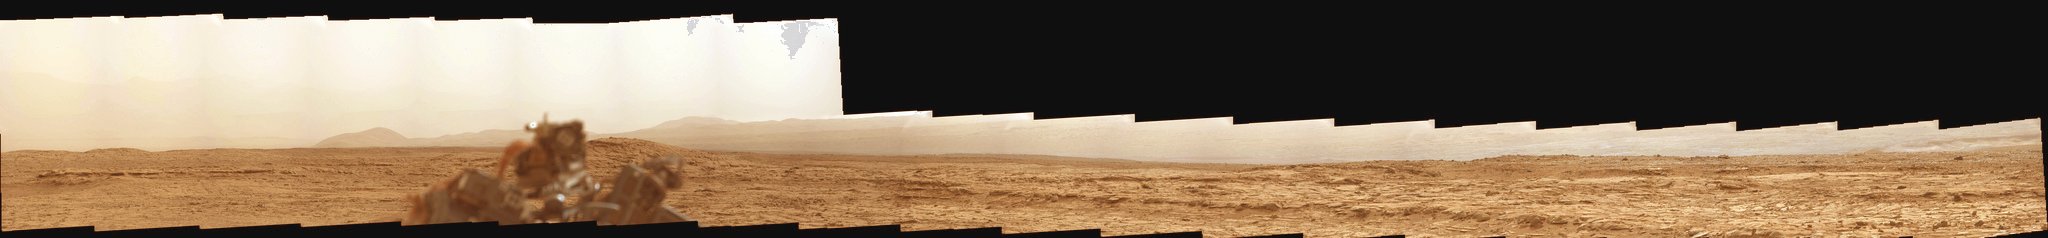 Horizon... - Sol 194 (an Image-Mosaic in Natural Colors; credits for the additional process. and color.: Elisabetta Bonora and Marco Faccin/Lunar Explorer Italia/Italian Planetary Foundation)
nessun commento
Parole chiave: Martian Horizon - Gale Crater - Surface, Inner Rim and Sky